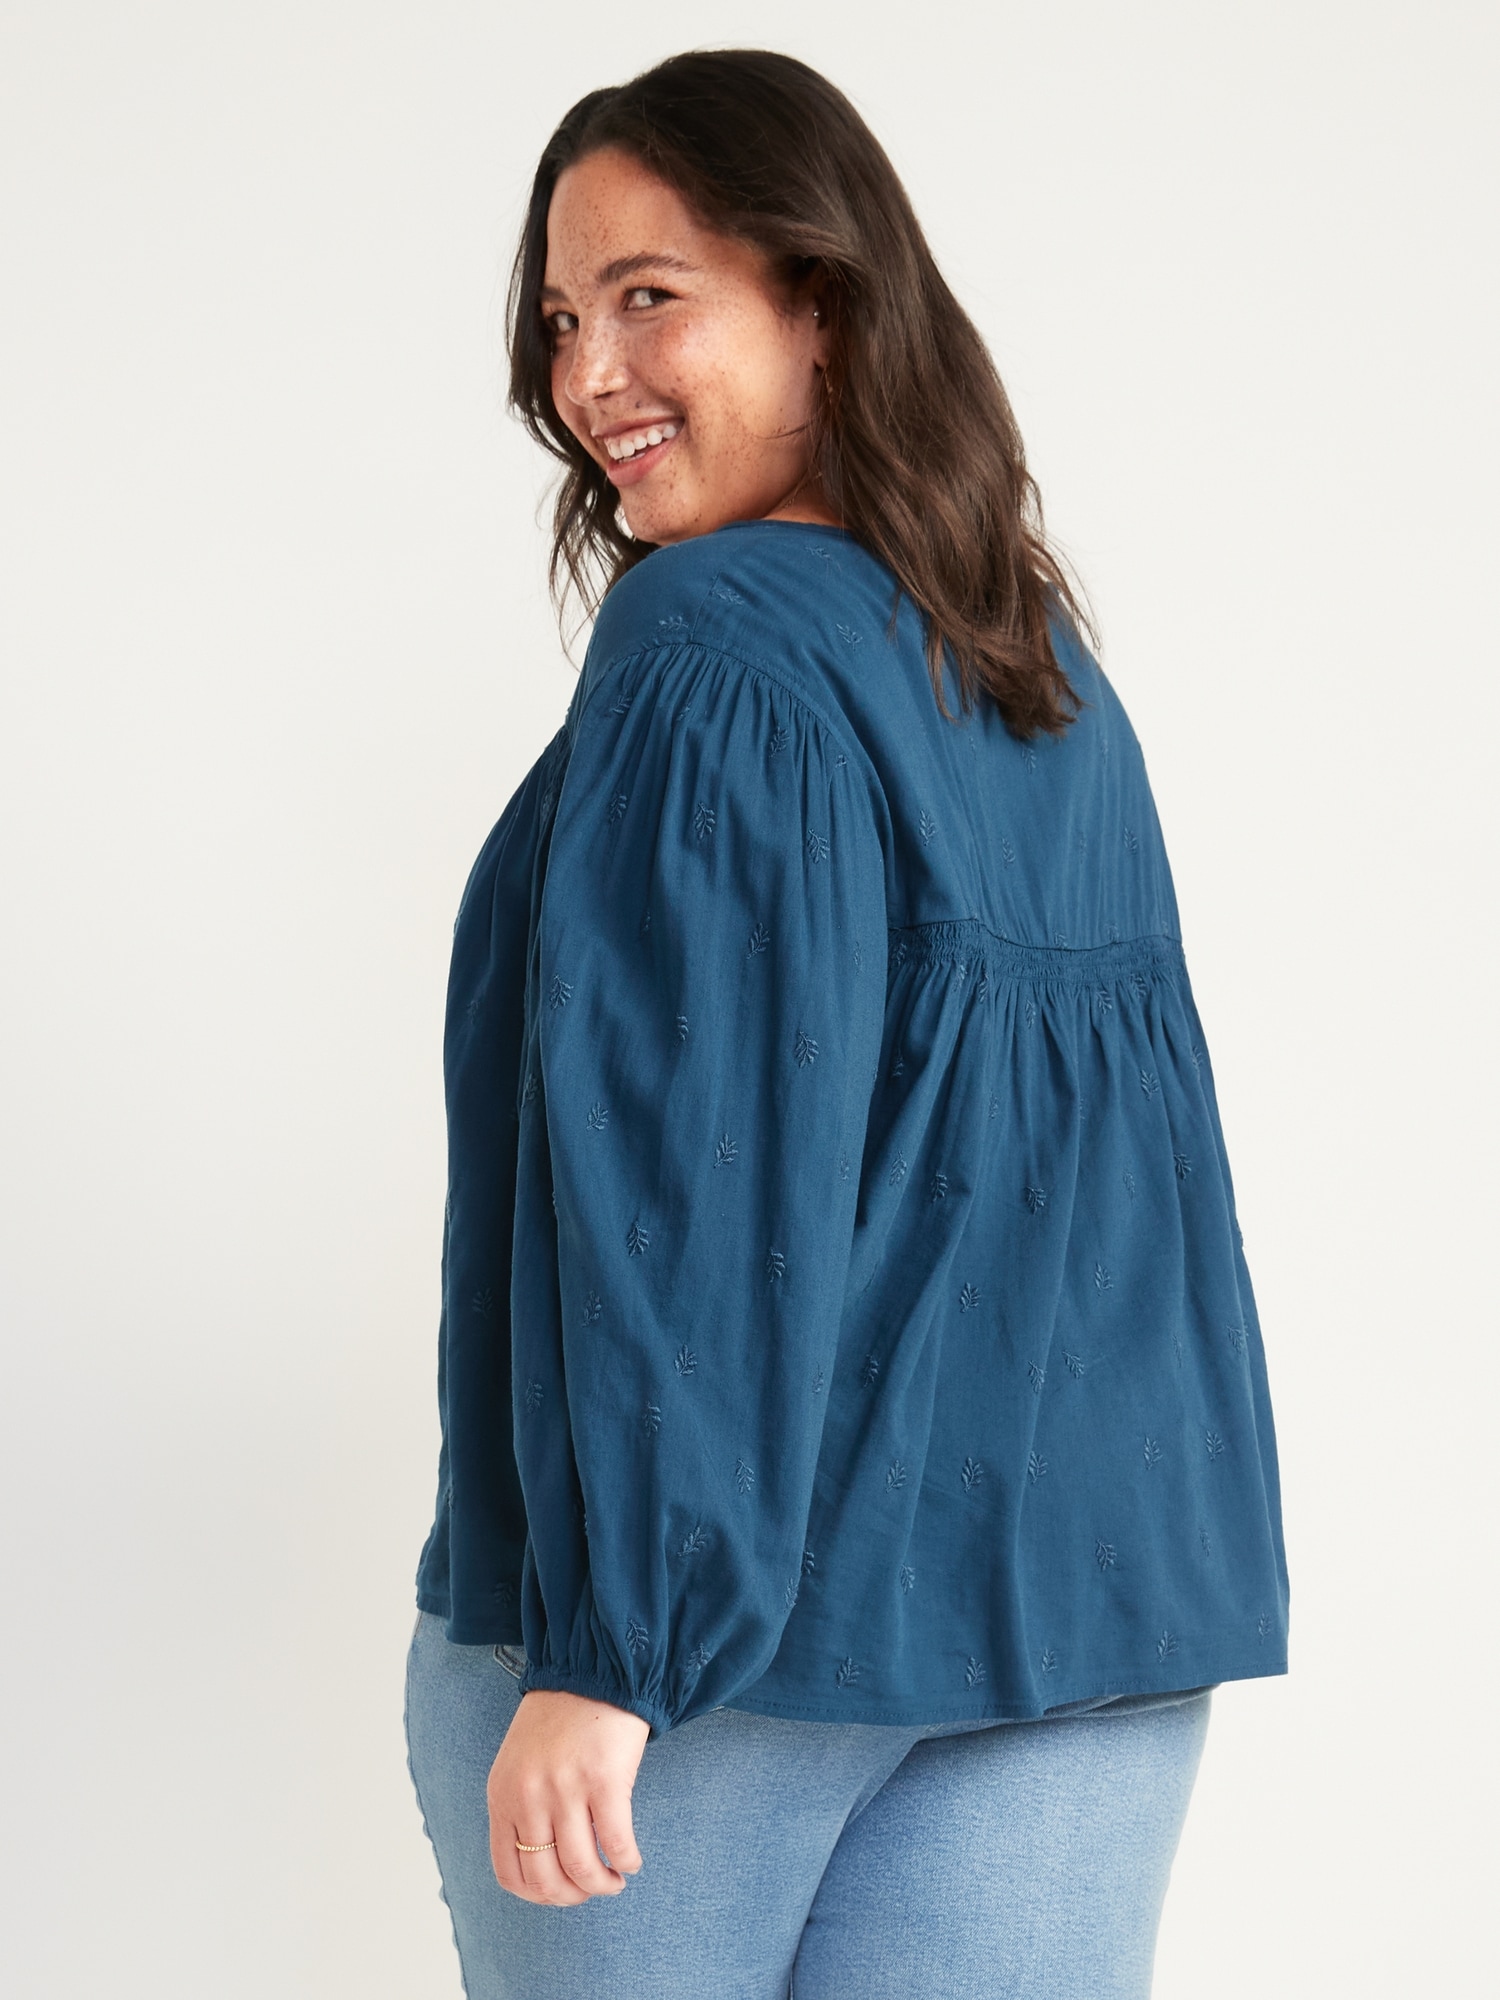 Long-Sleeve Embroidered Poet Blouse for Women | Old Navy